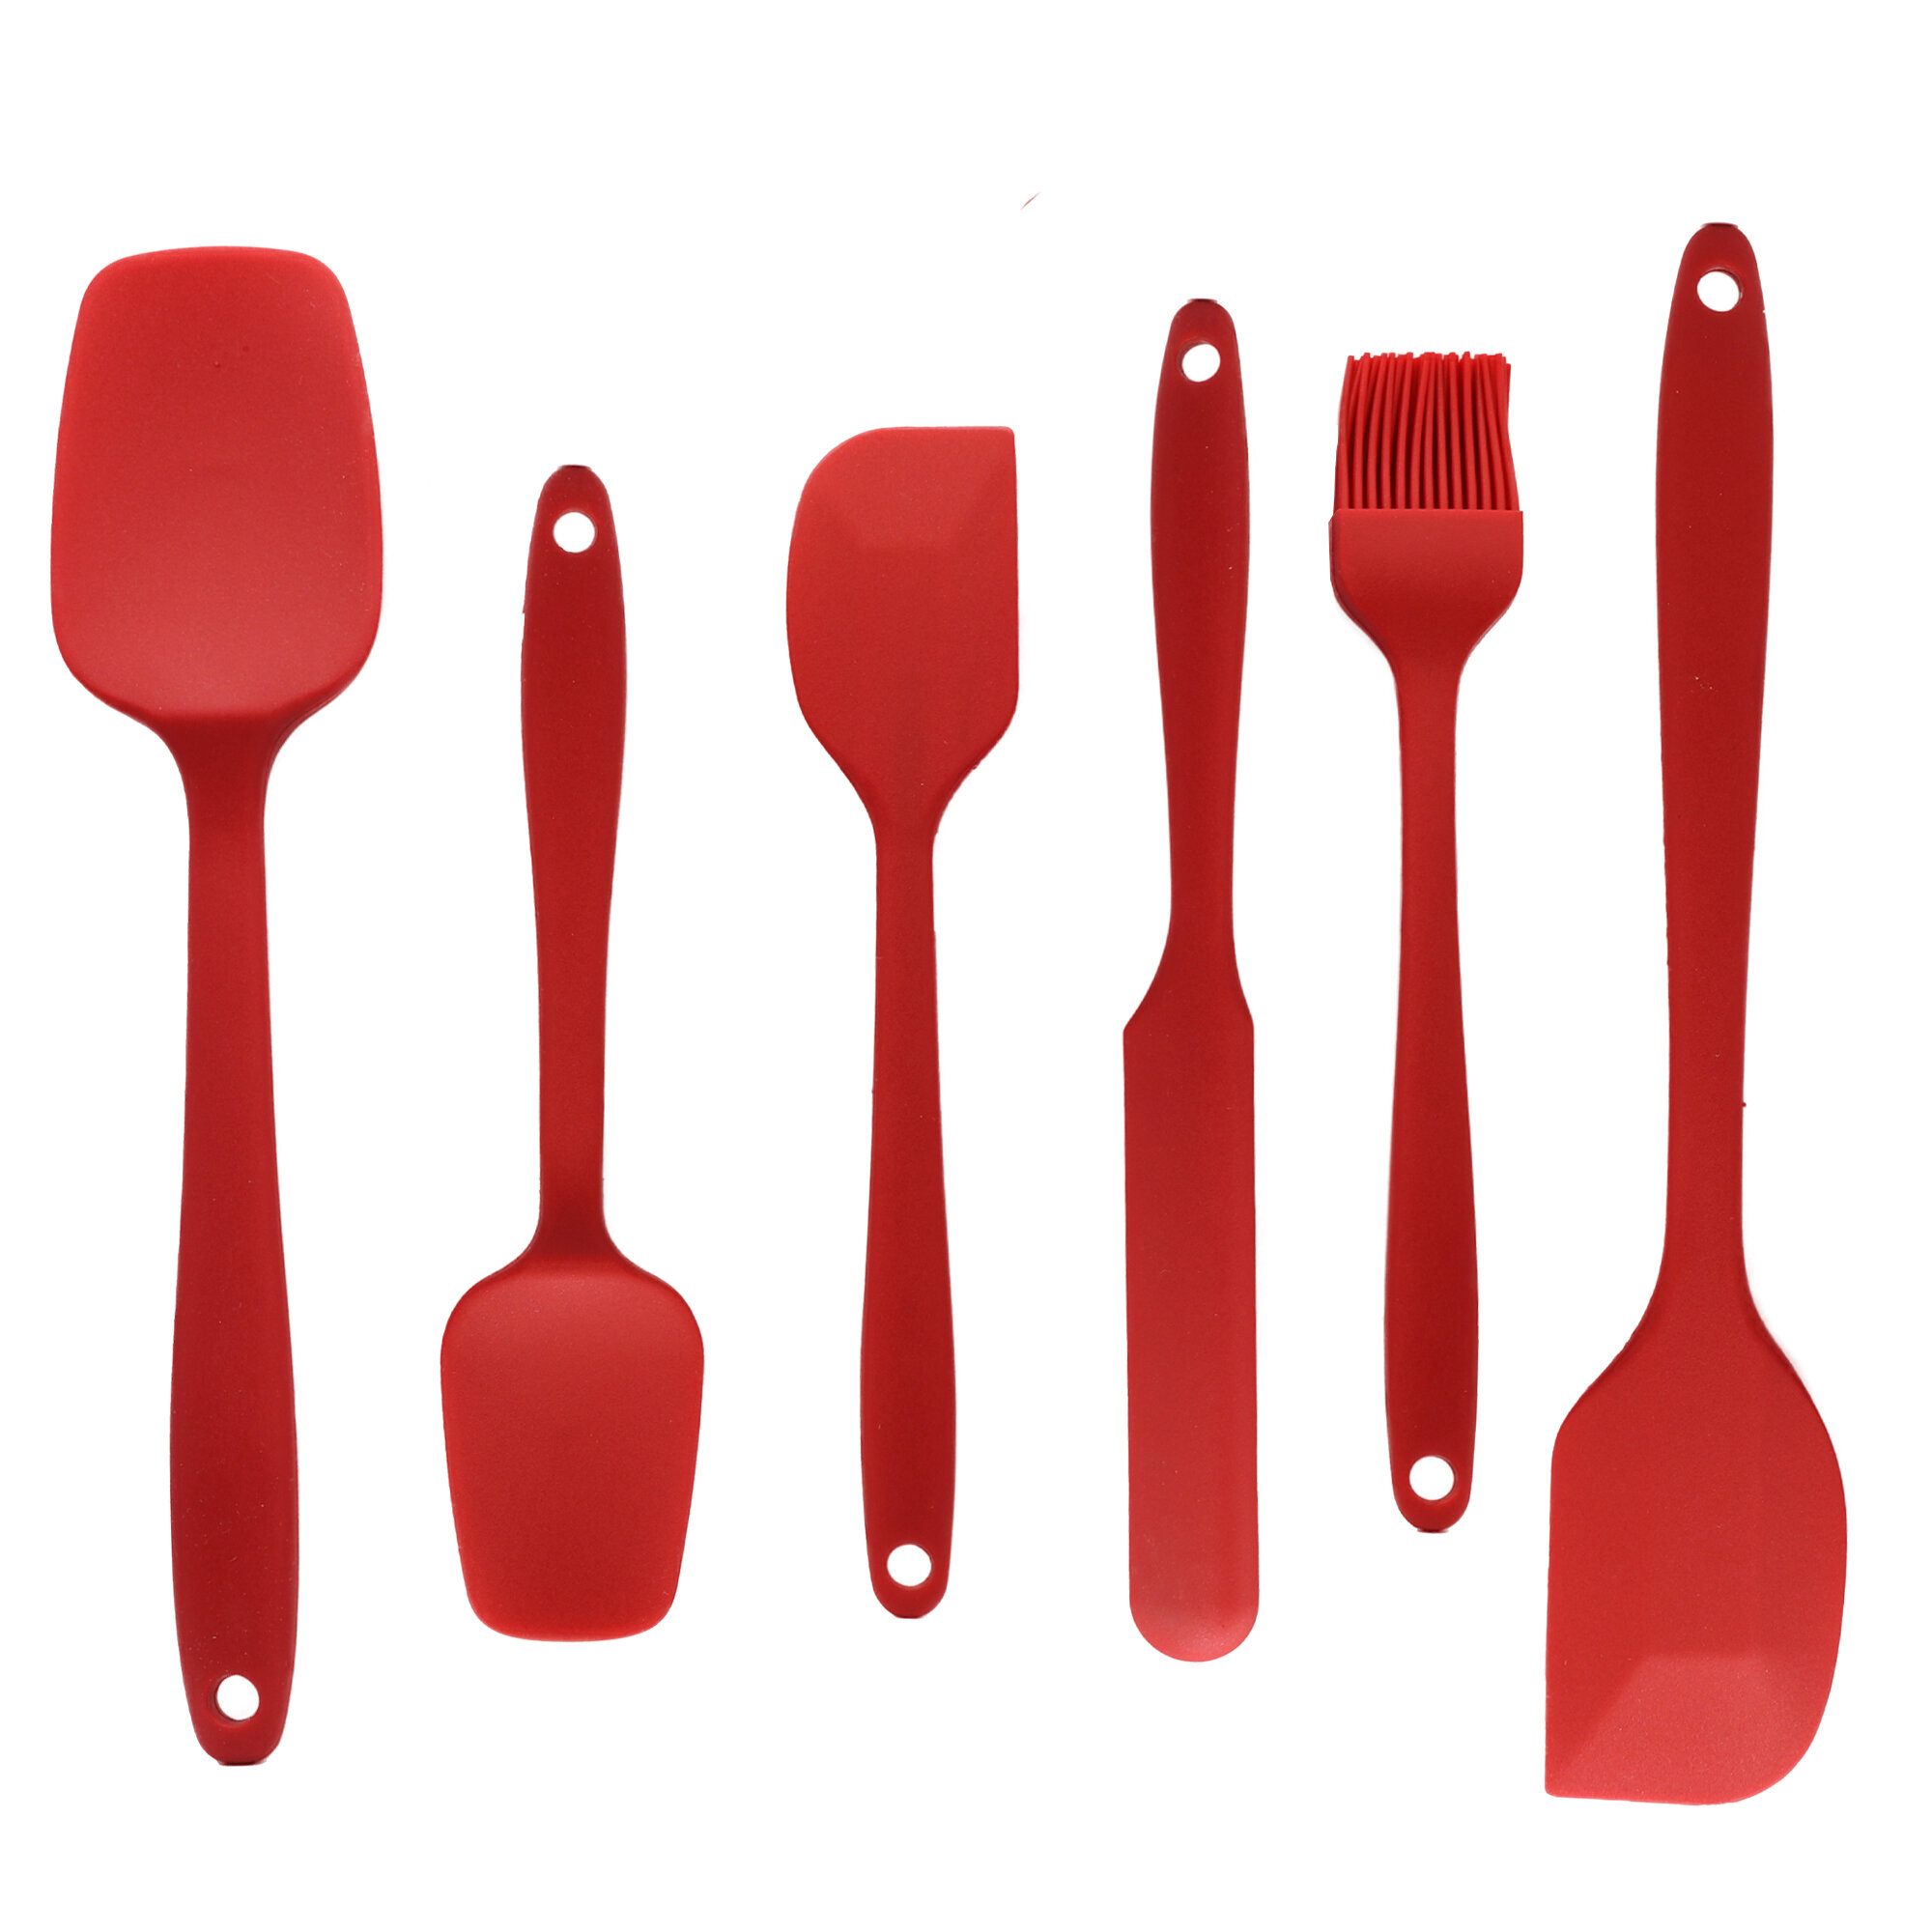 Cheer Collection 6 -Piece Silicone Spatula / Turner Set